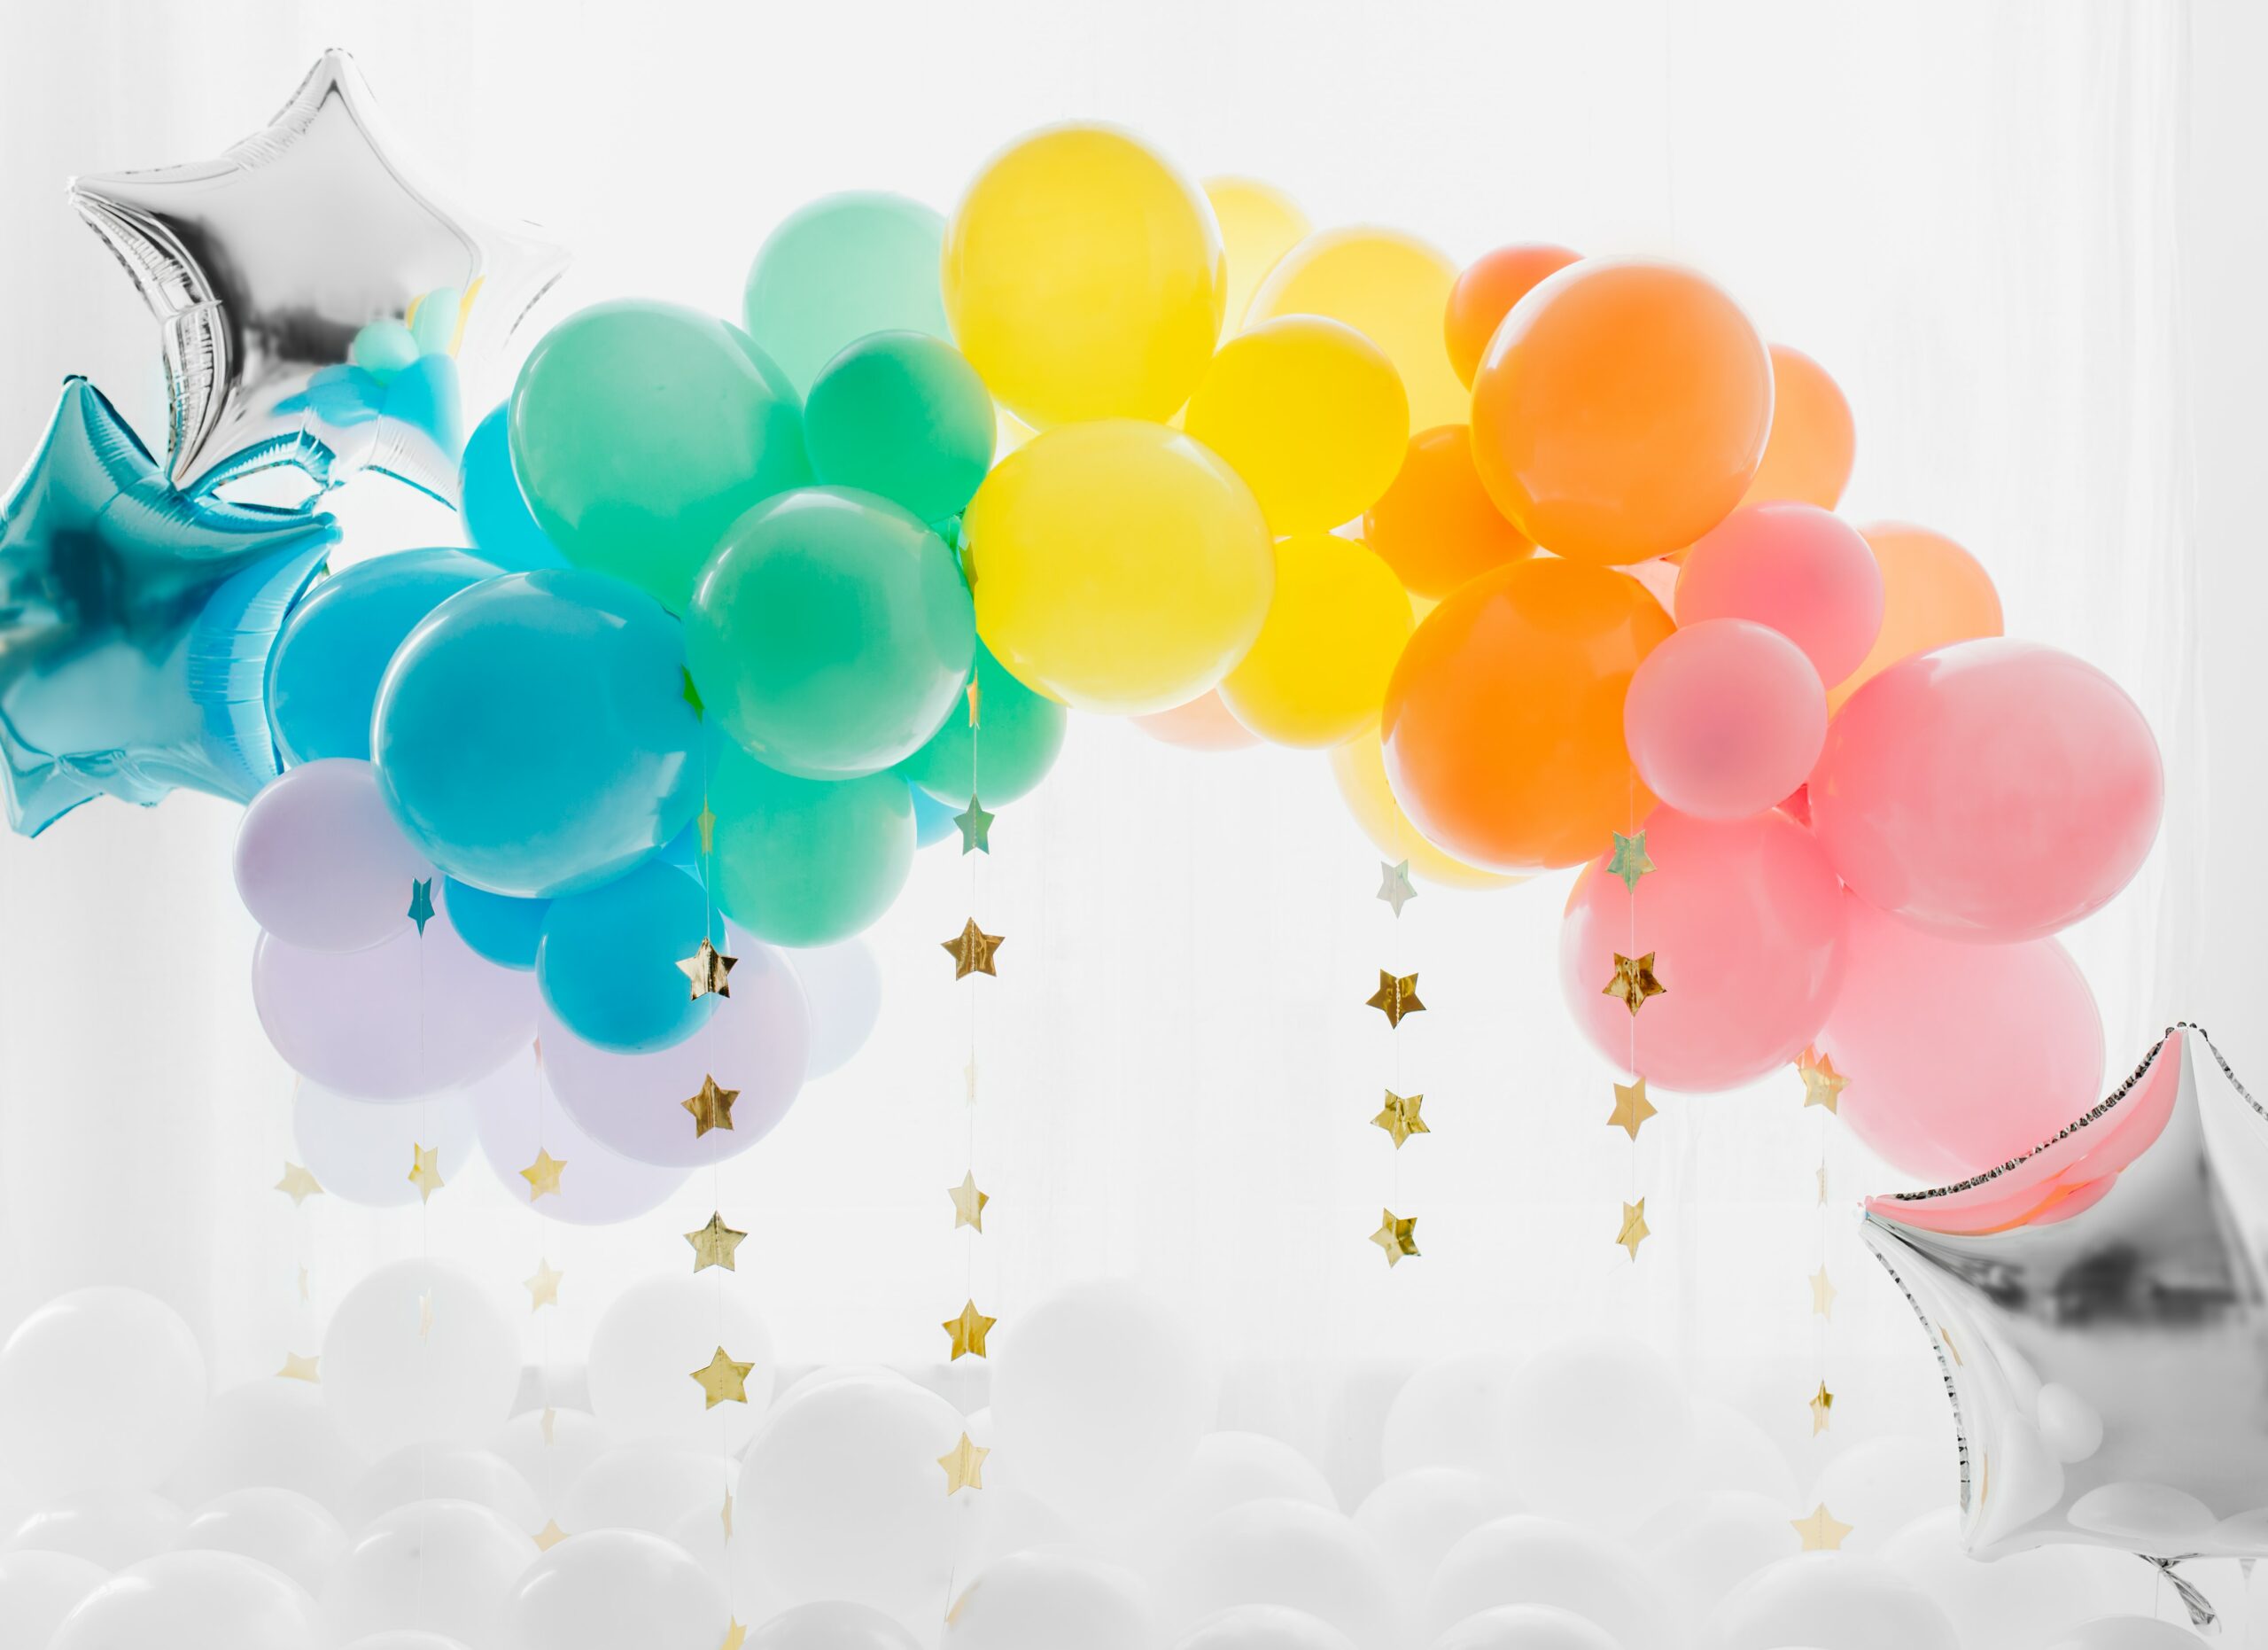 Spectacular Balloons & Events